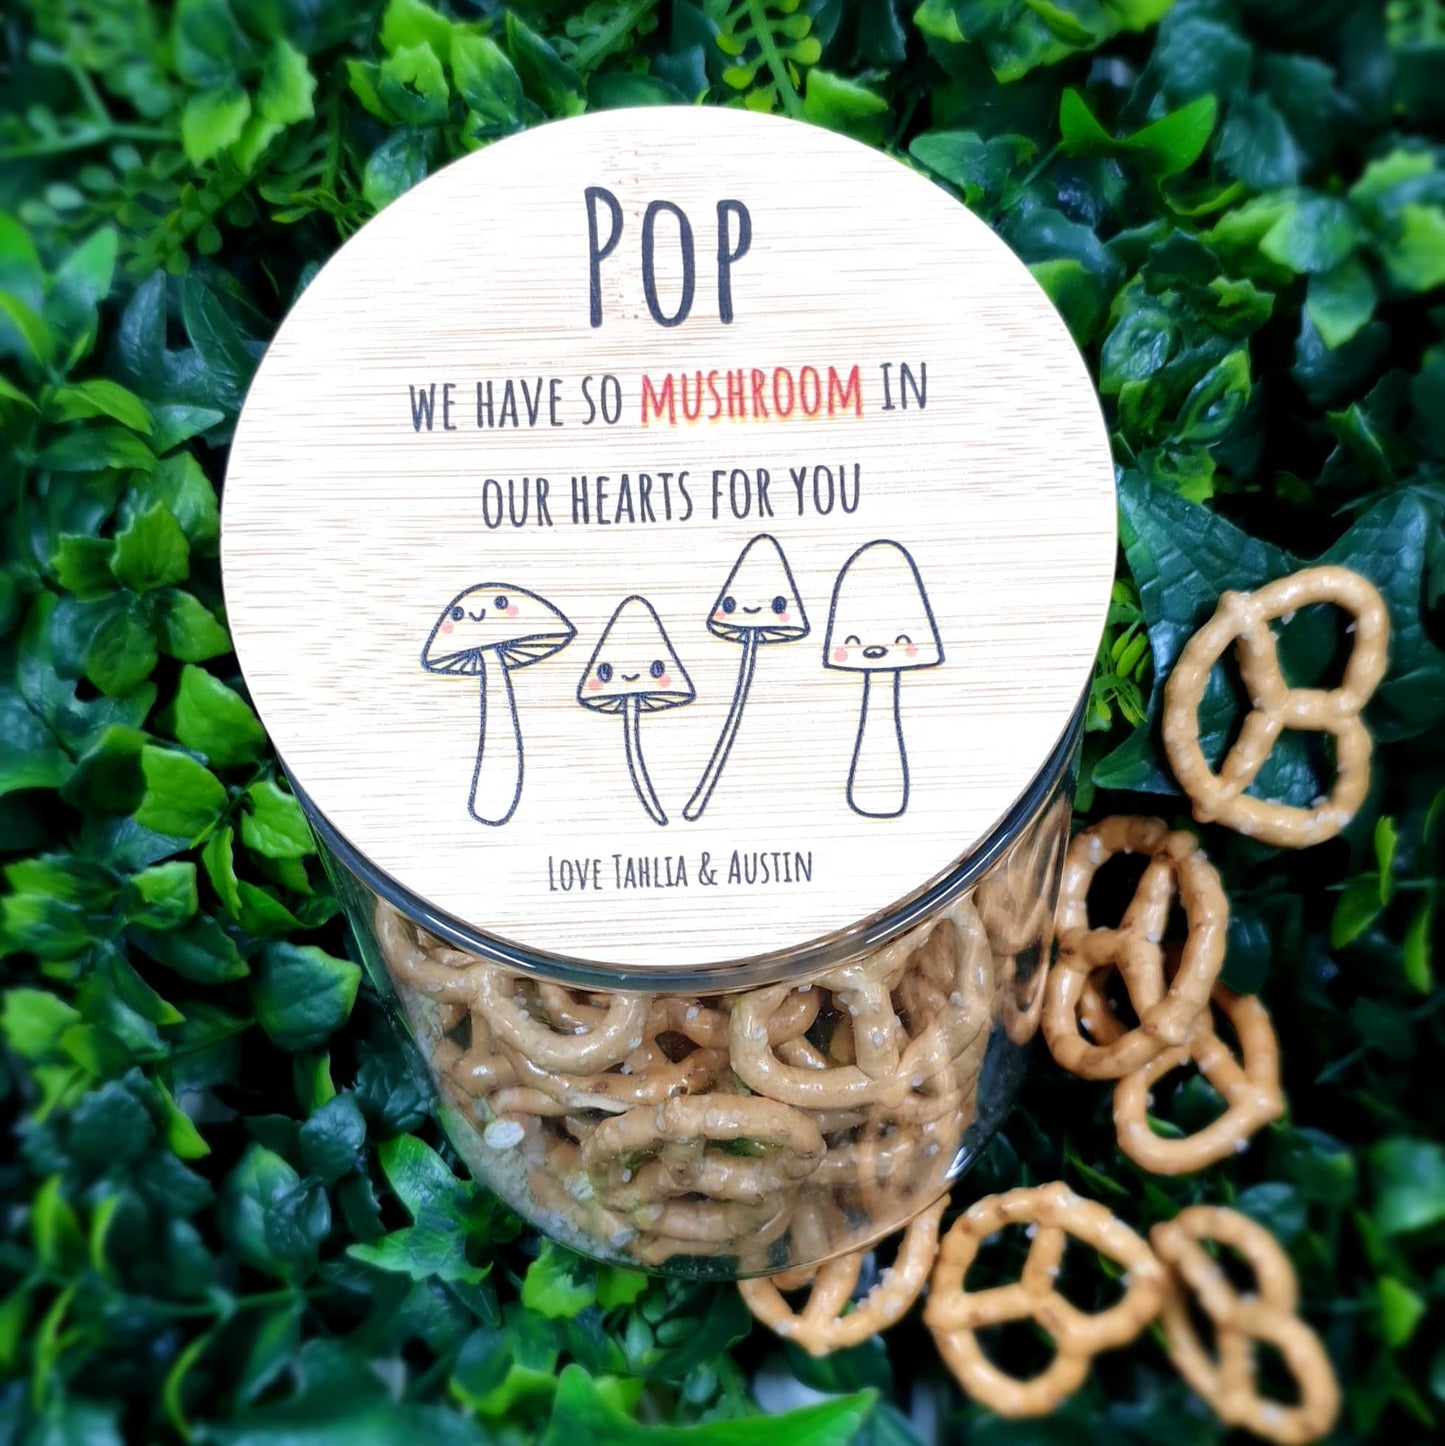 Mushroom in our hearts - Father's day Jars ( Pop can be changed to suit)